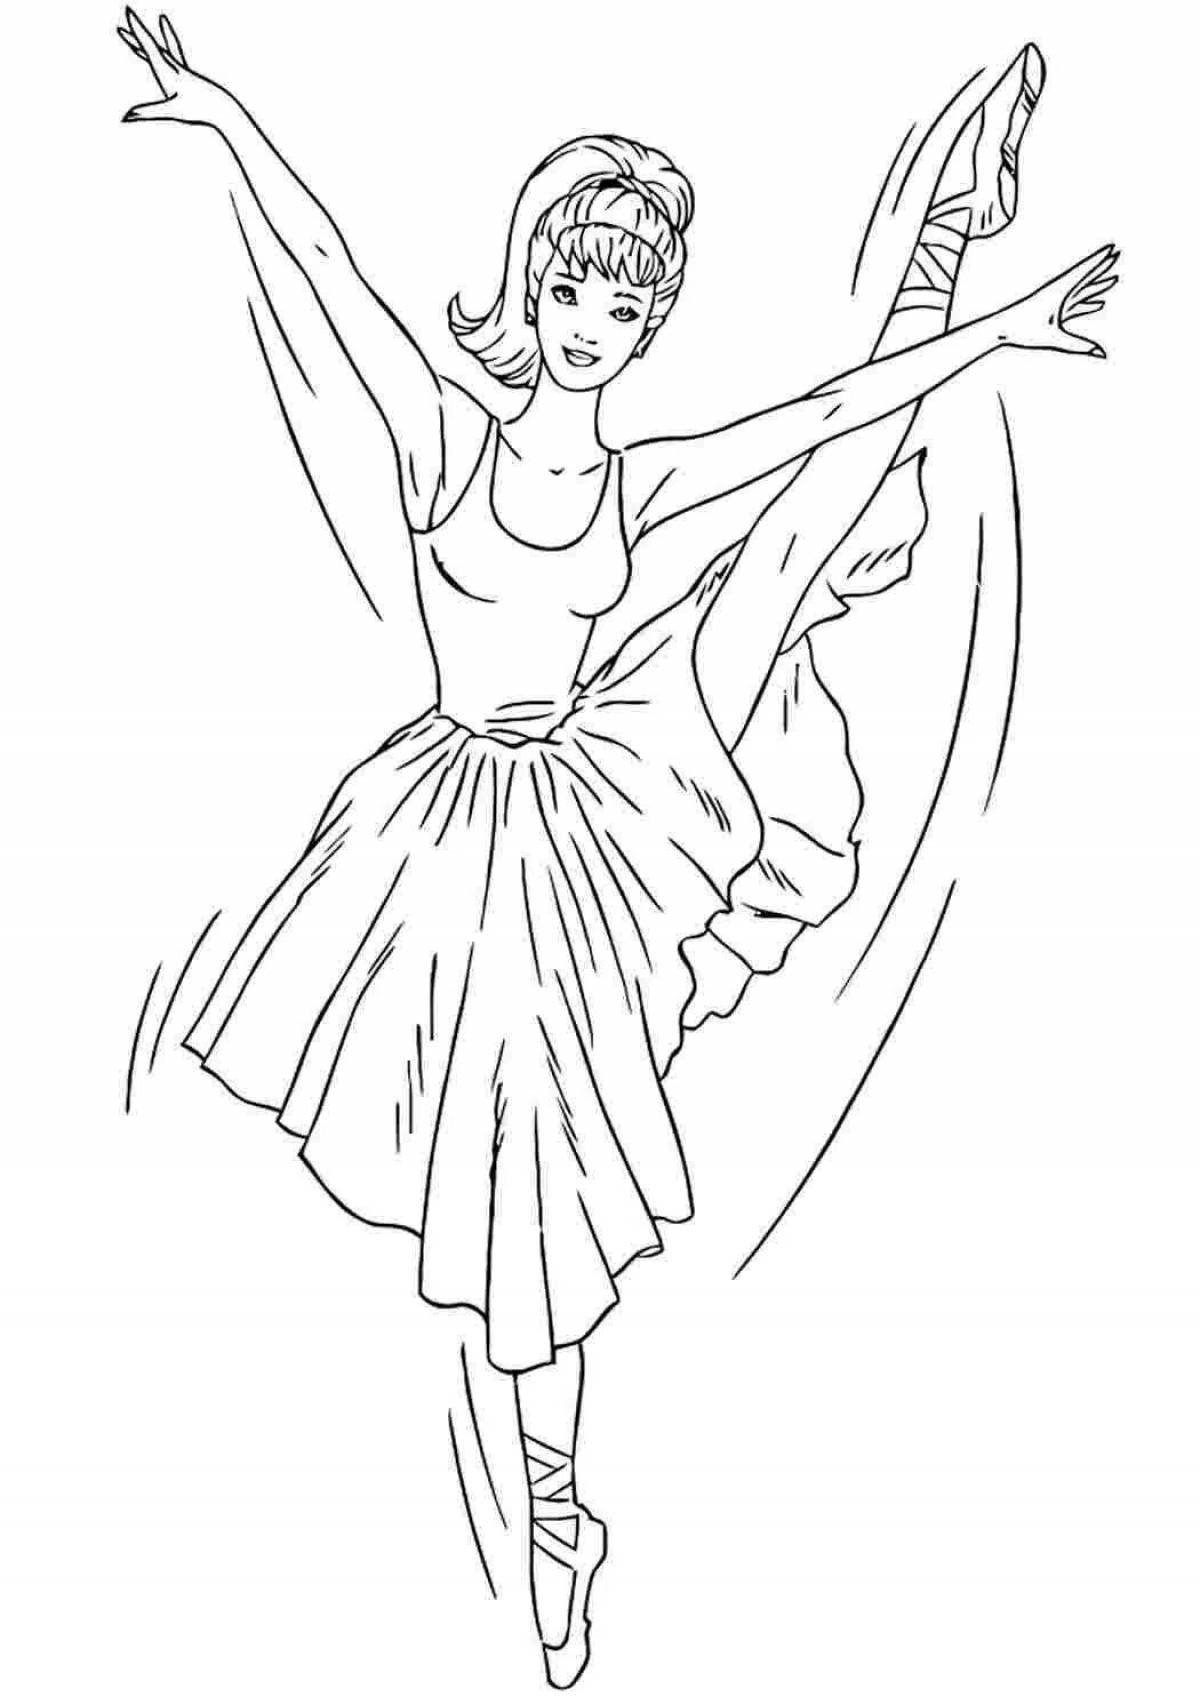 Delicate drawing of a ballerina